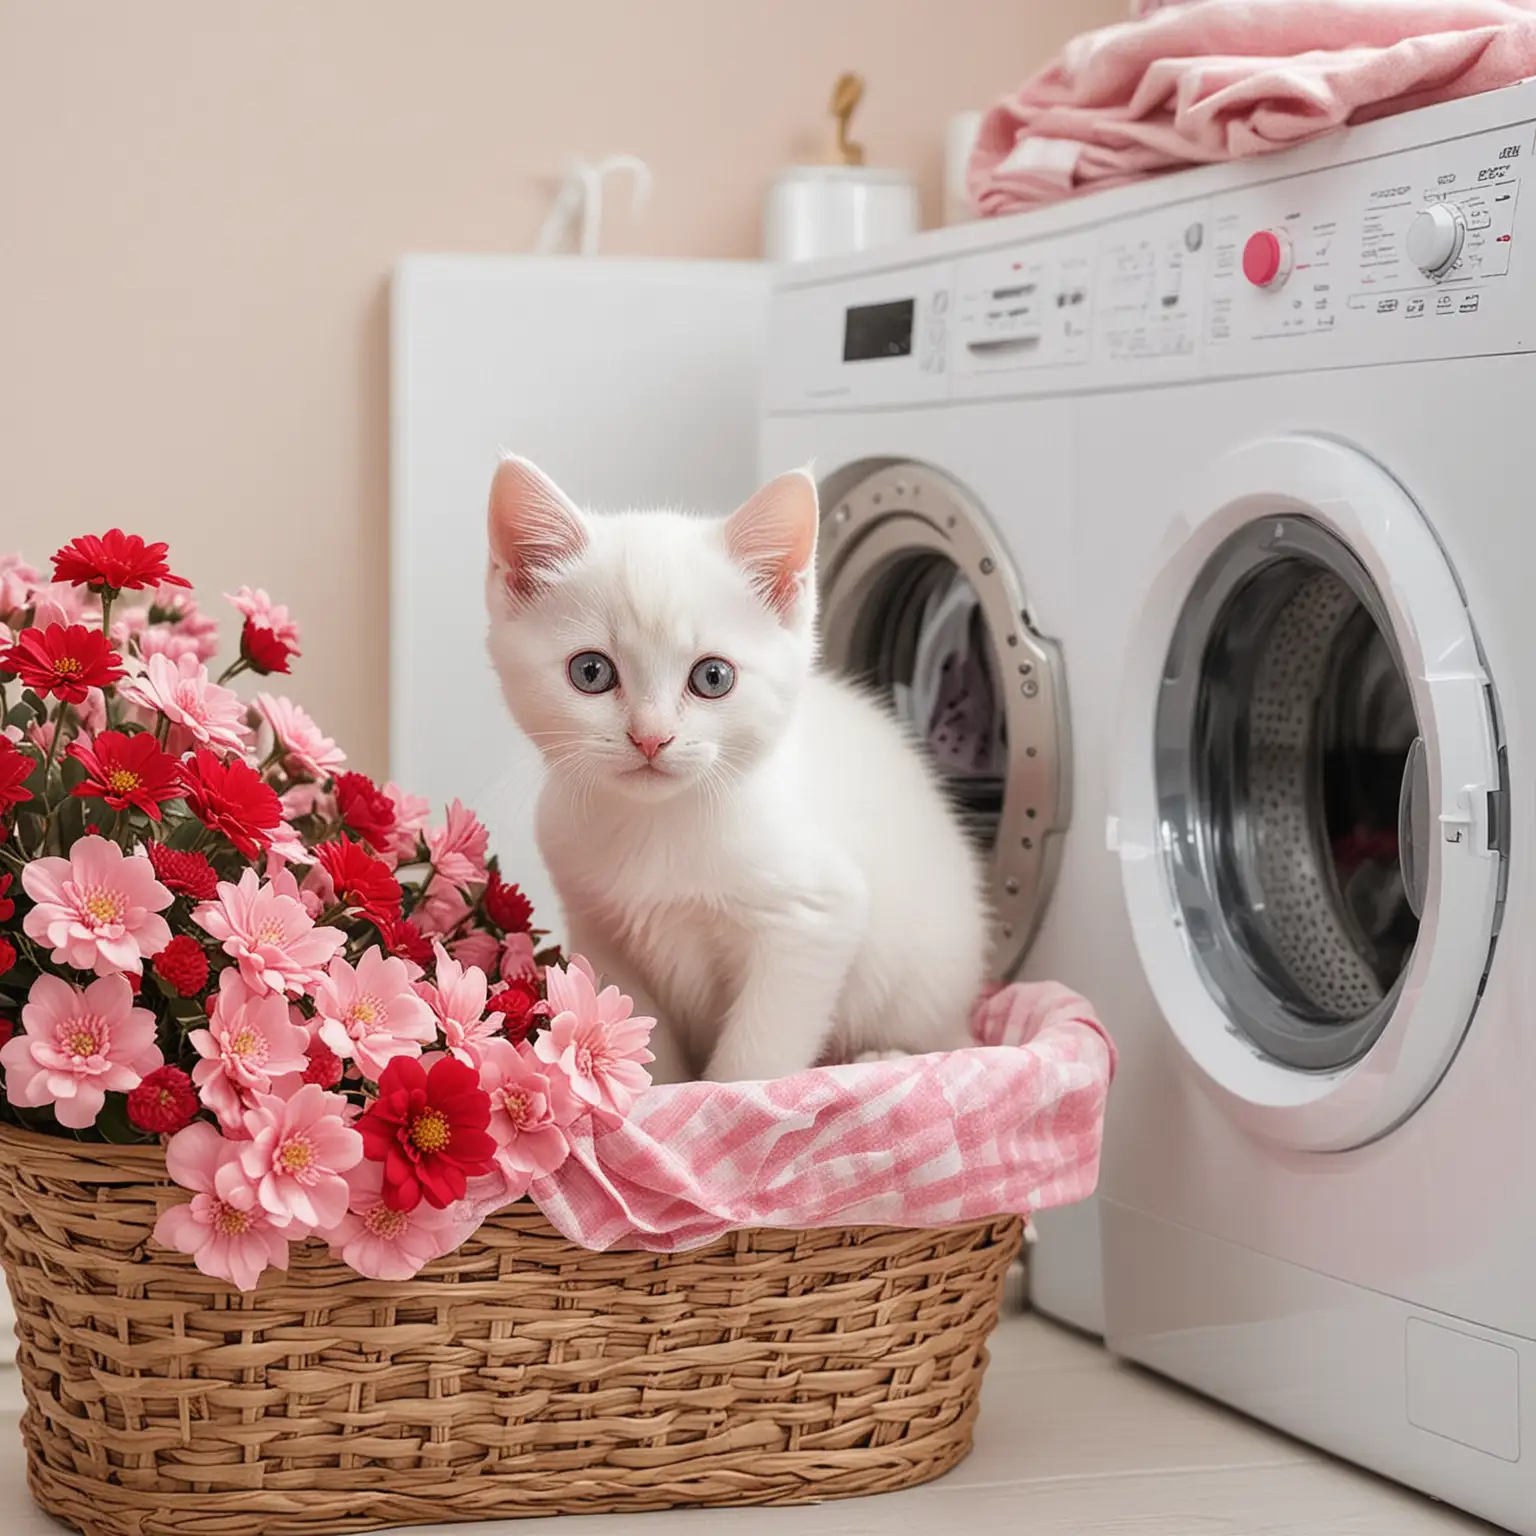 Please generate an washing machine with red and pink flowers behind it. Near the washing machine and a little jn front of it put a white kitten playing with a basket of laundry